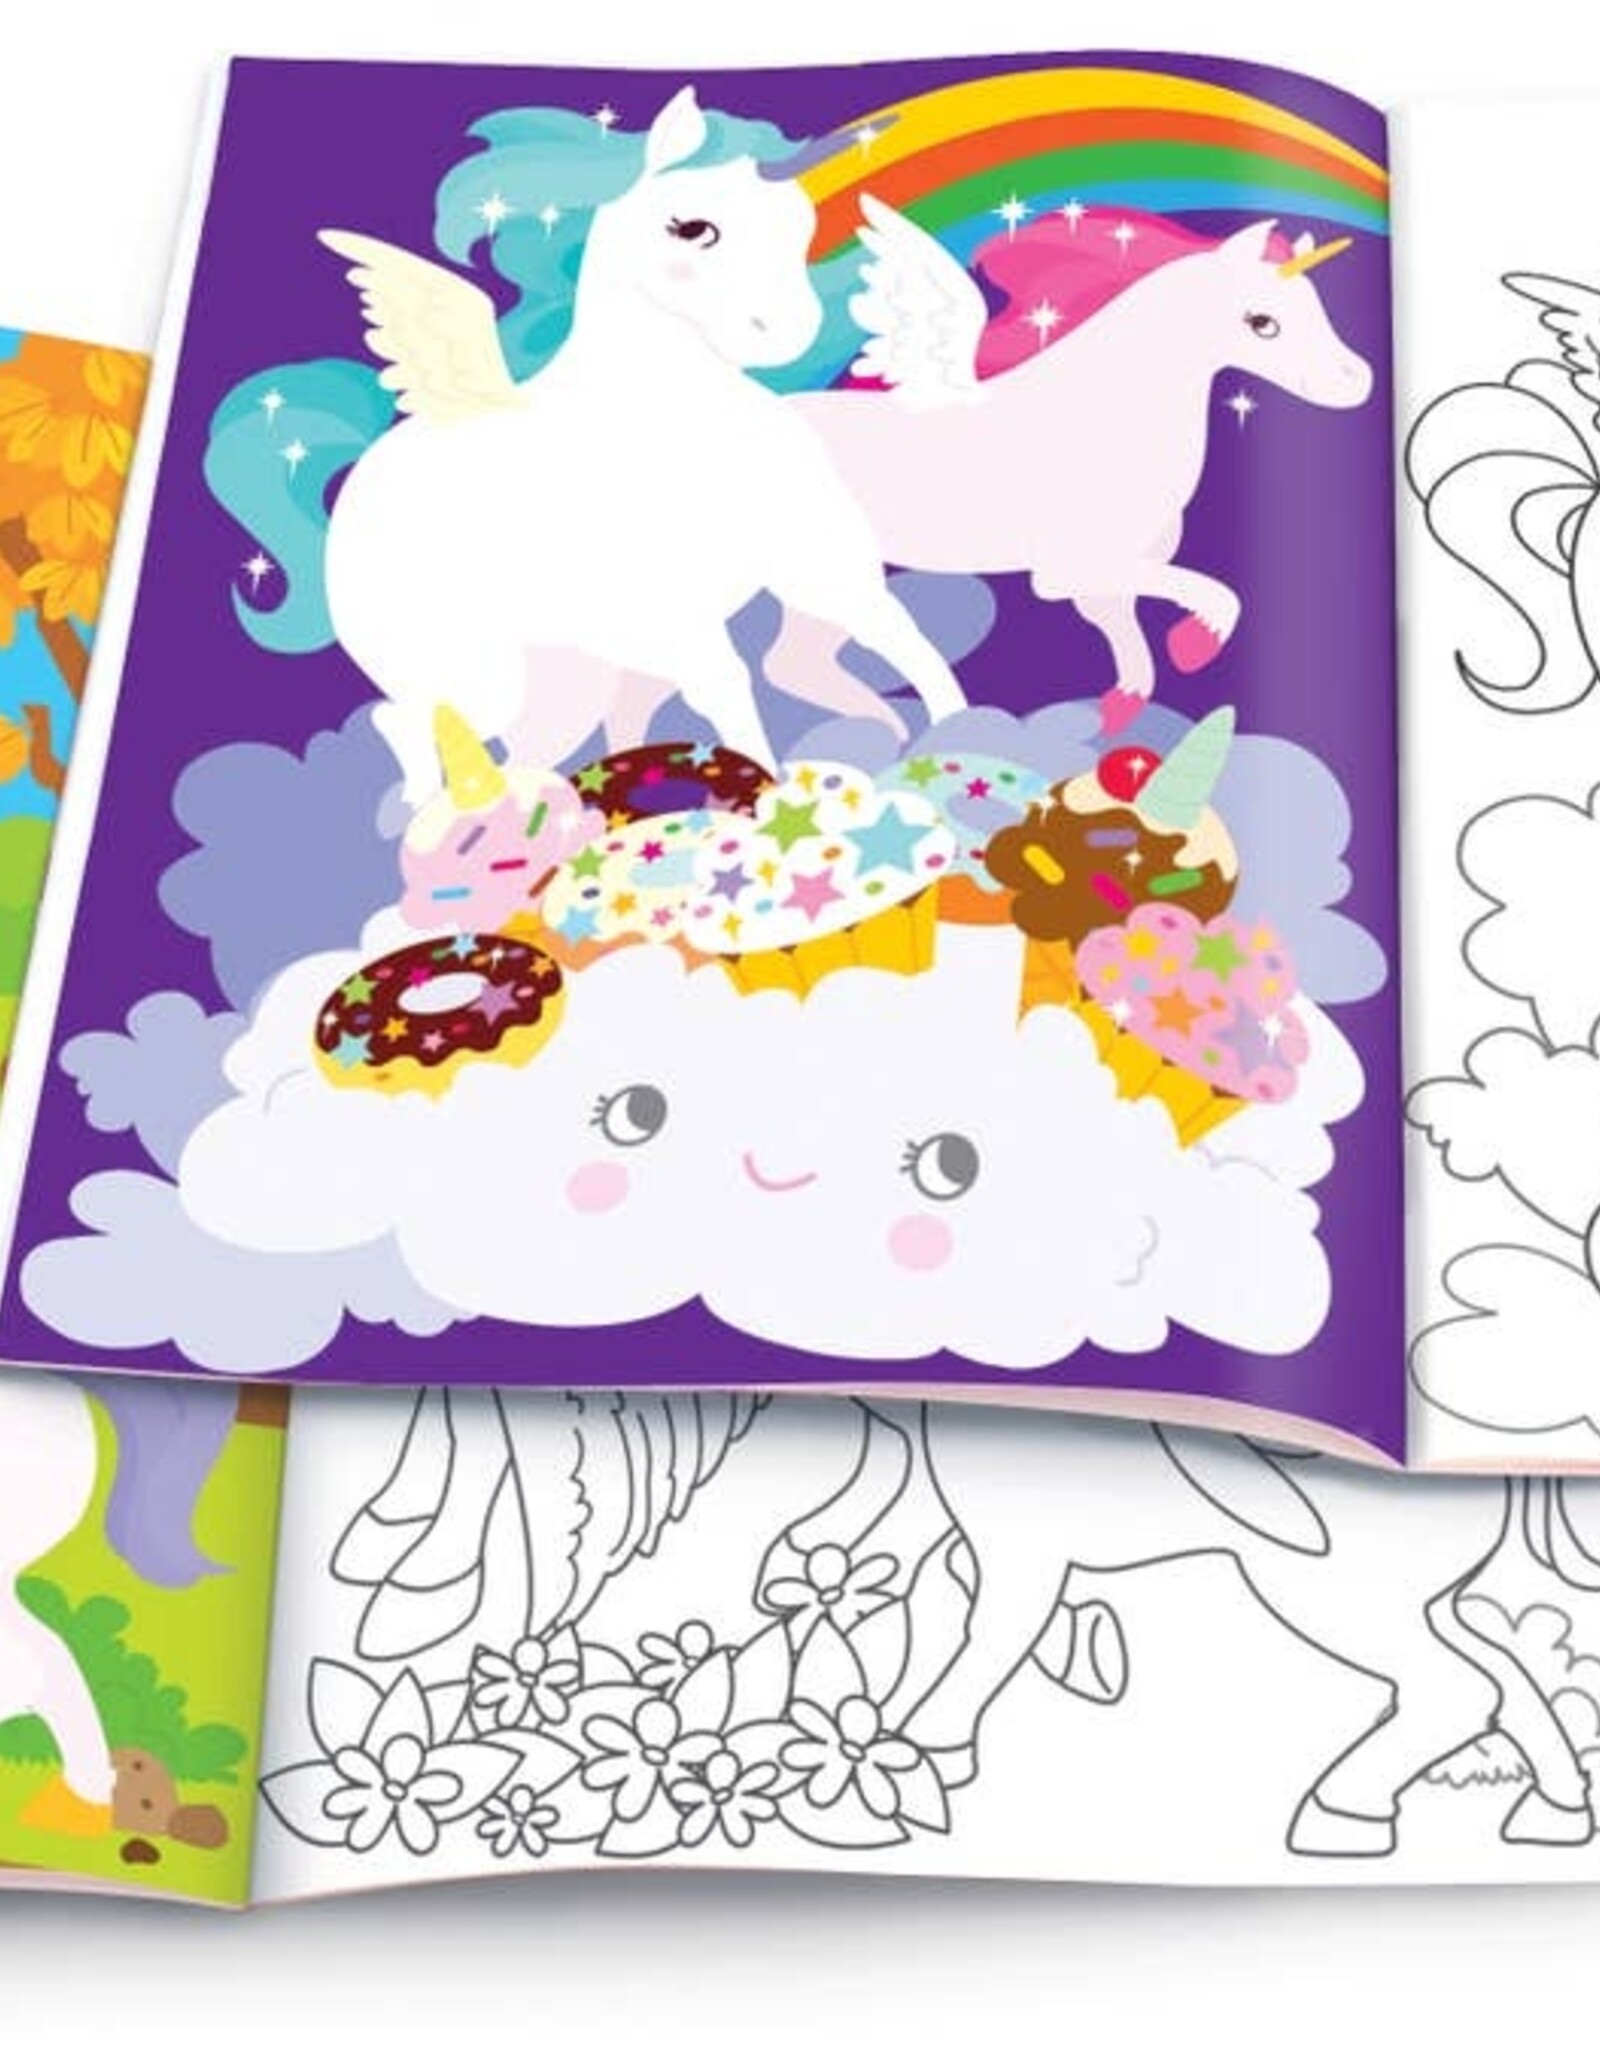 Dry Erase Coloring Book with Reusable Stickers- Magical Mermaids - The  Piggy Story